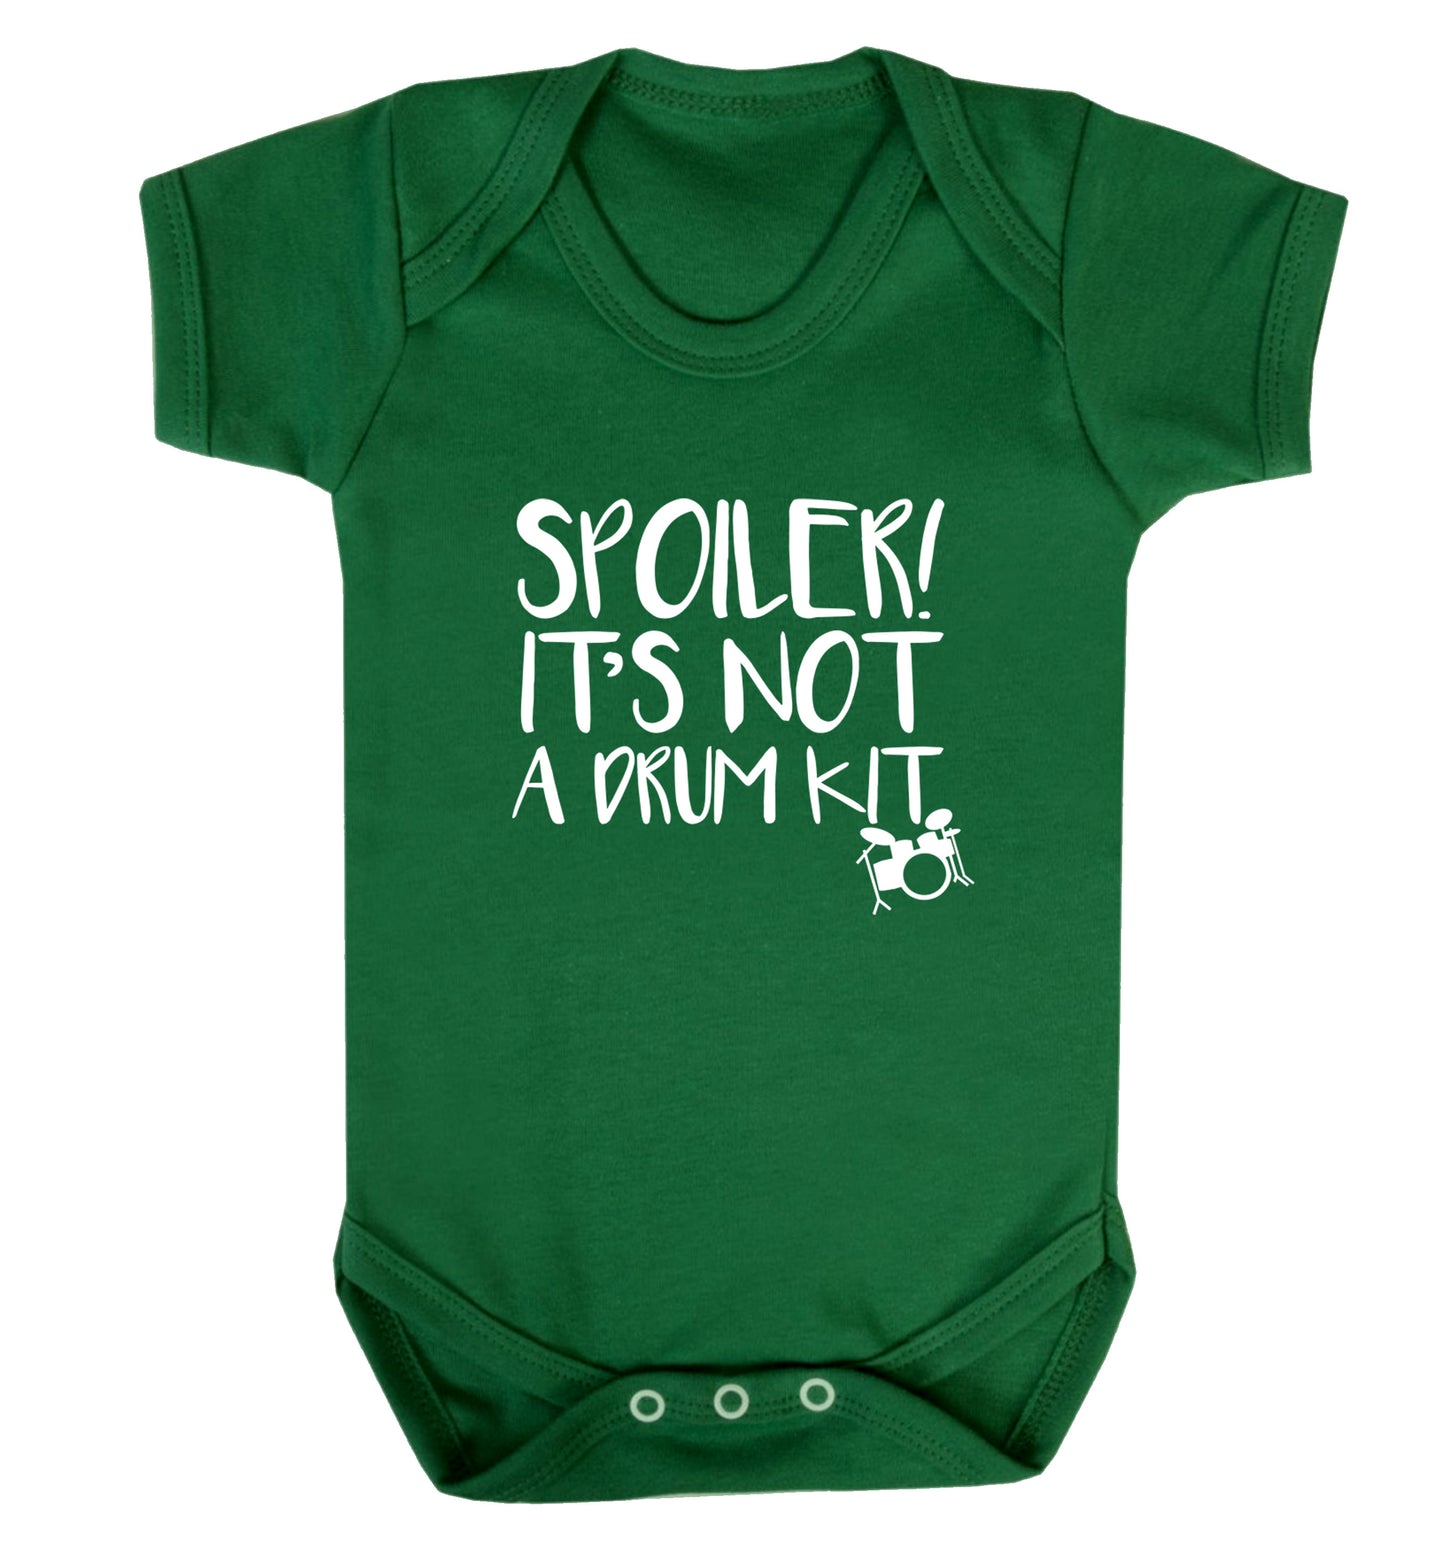 Spoiler it's not a drum kit Baby Vest green 18-24 months